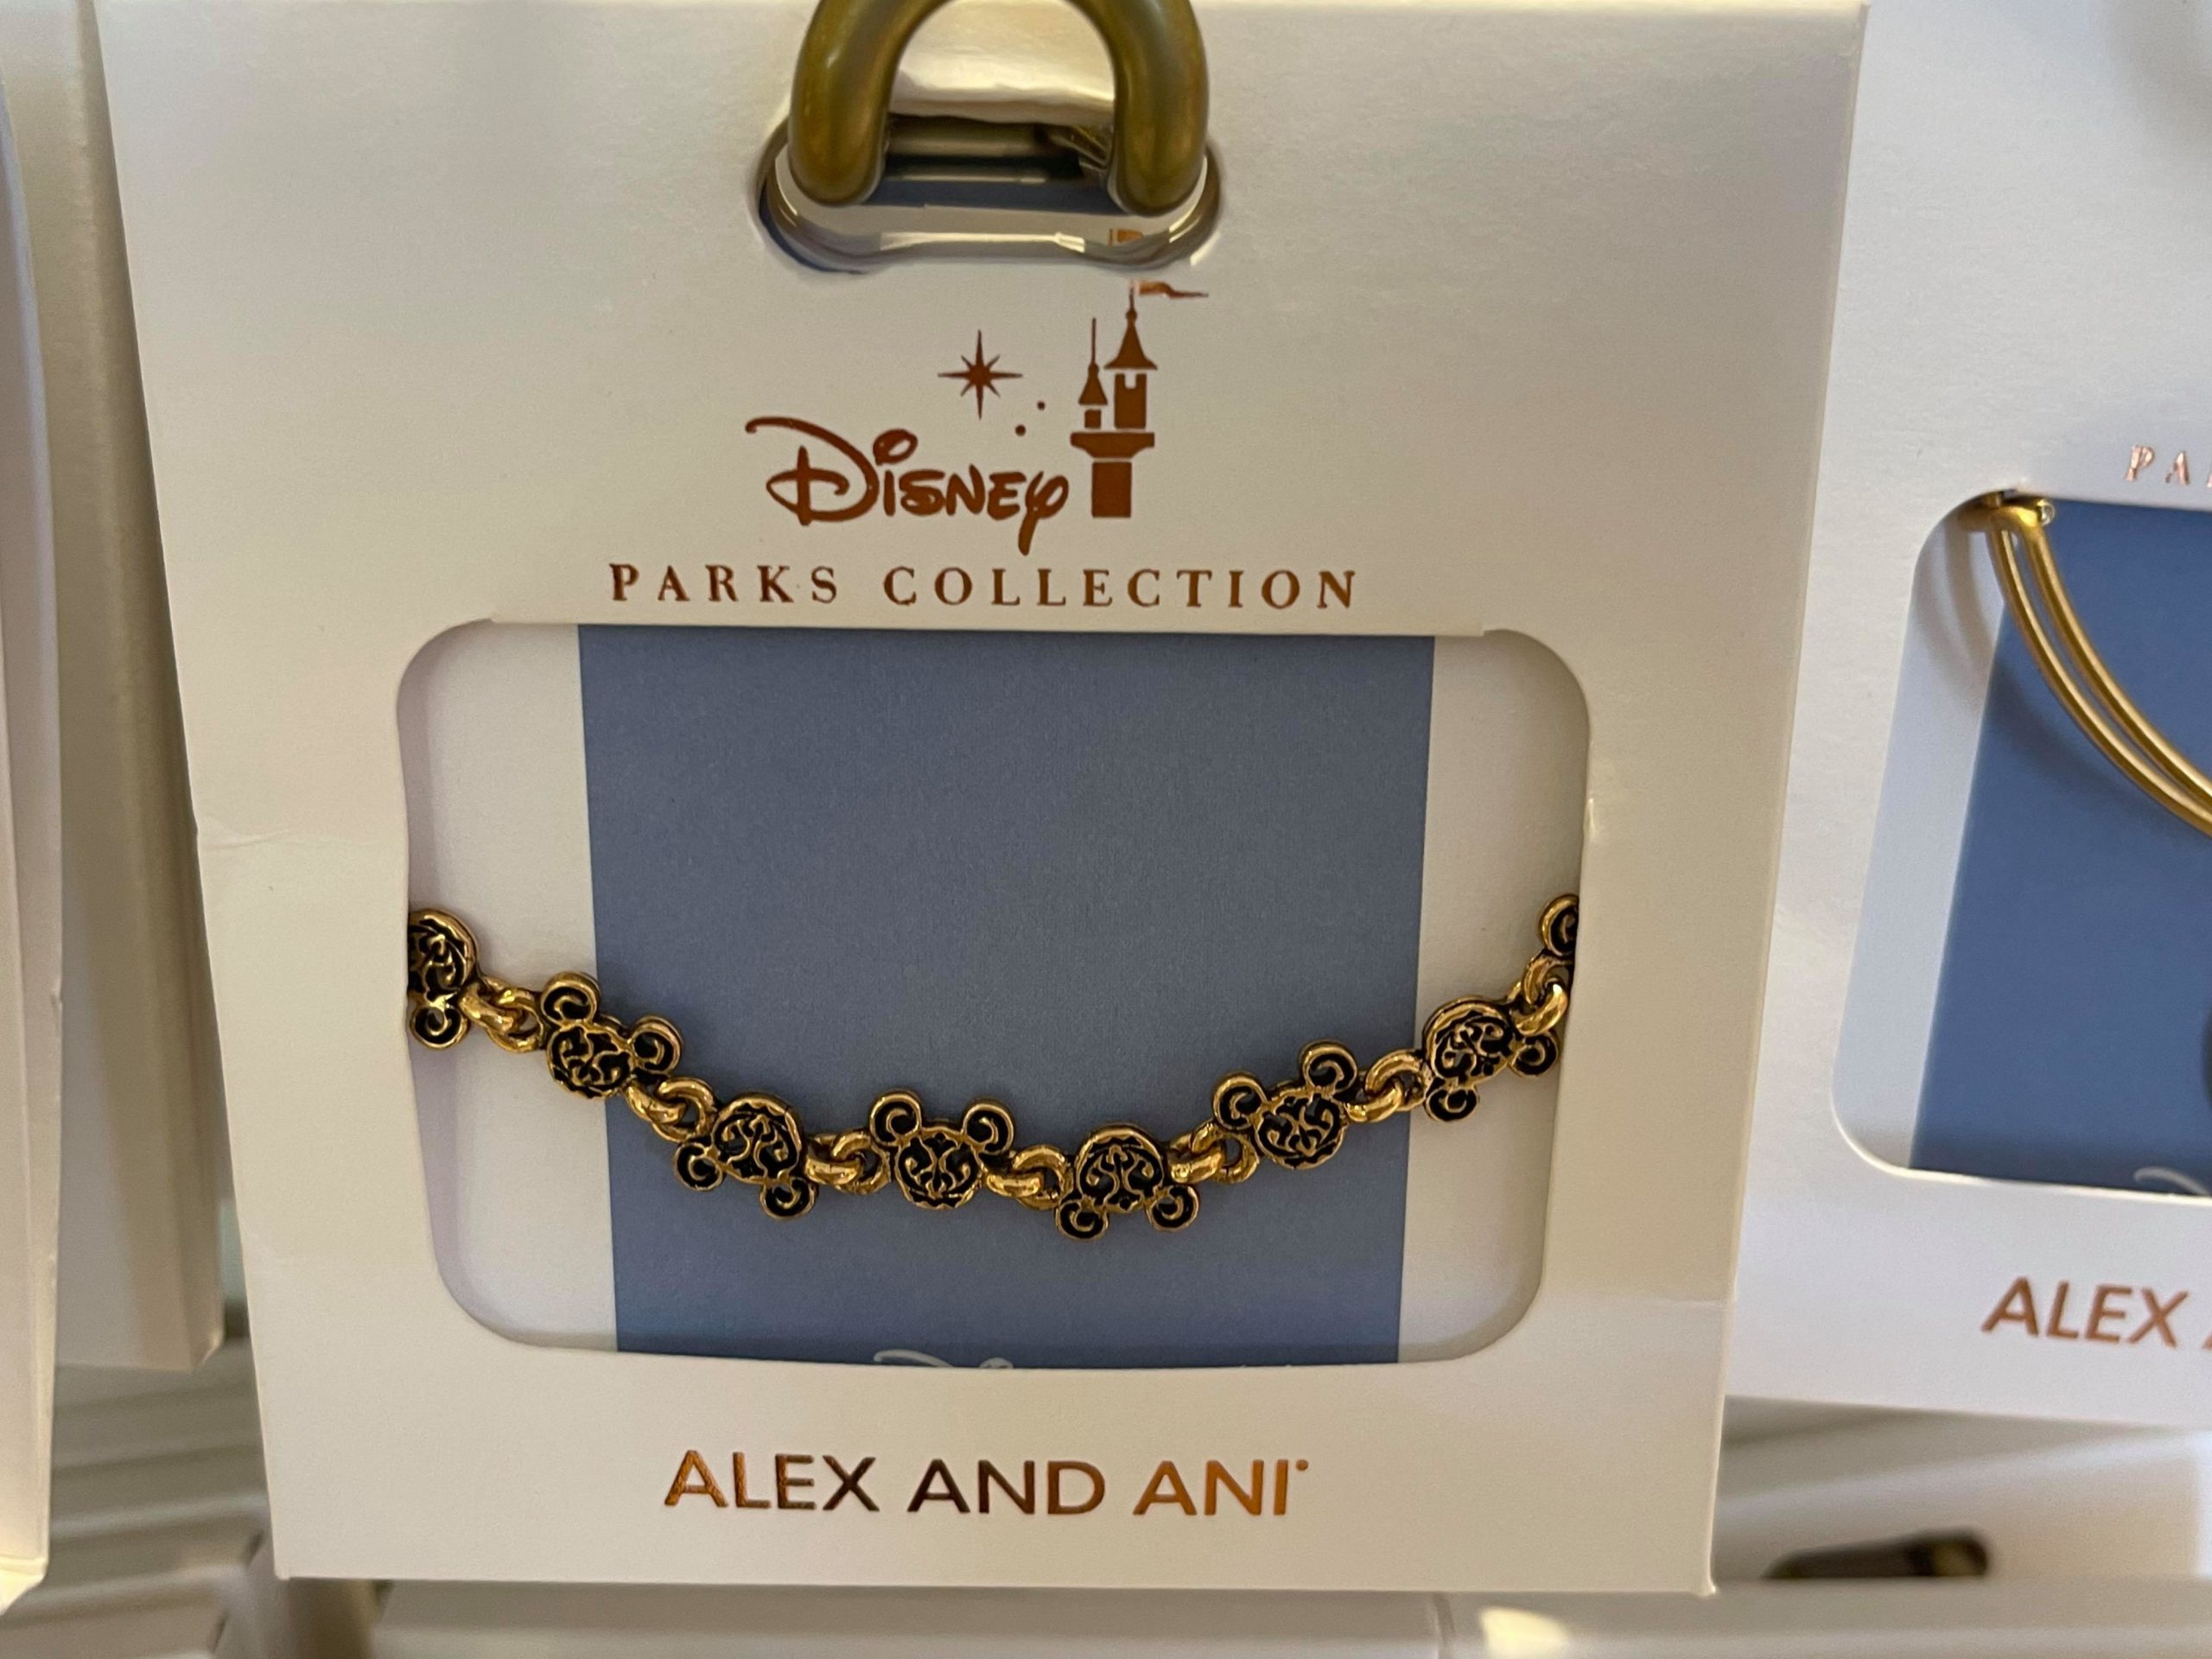 Alex and Ani Add Classics to Parks Collection - MickeyBlog.com